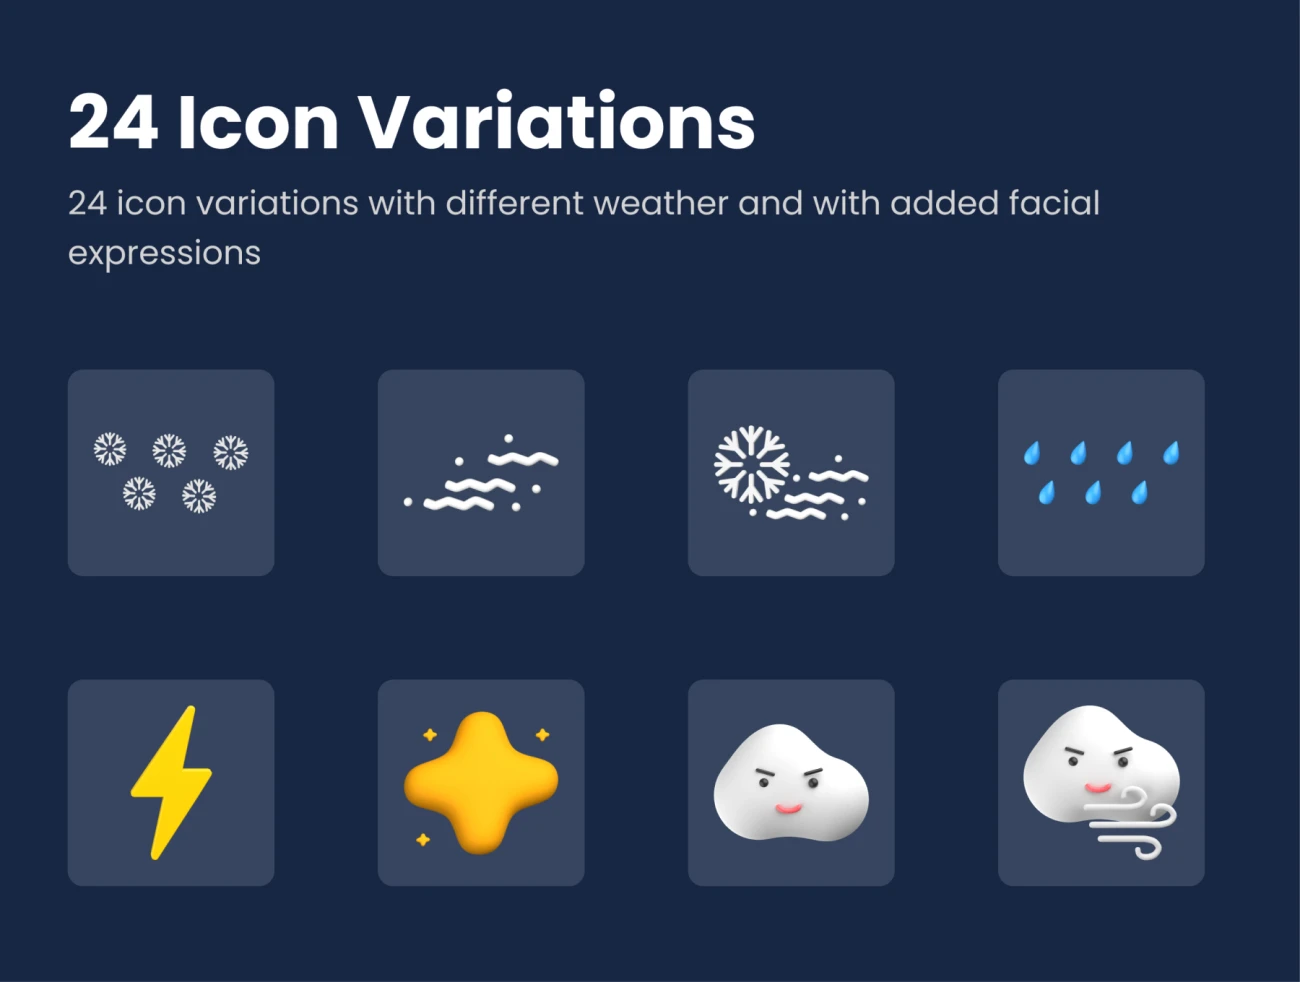 3D拟人情绪化天气图标24款素材下载 3D Weather Icons Emoticons Pack .figma .png .psd插图11